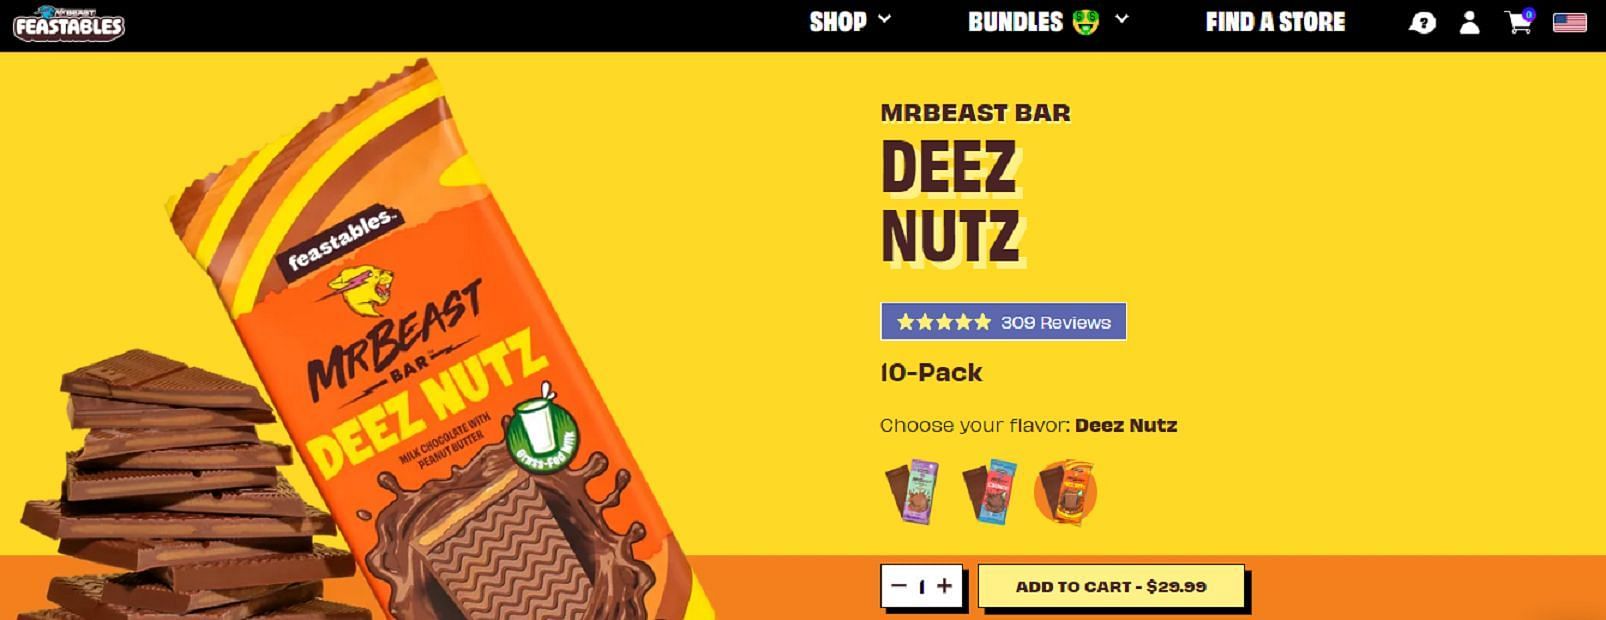 Users can still purchase Deez Nuts from the Feastables website. (Image via feastables.com)